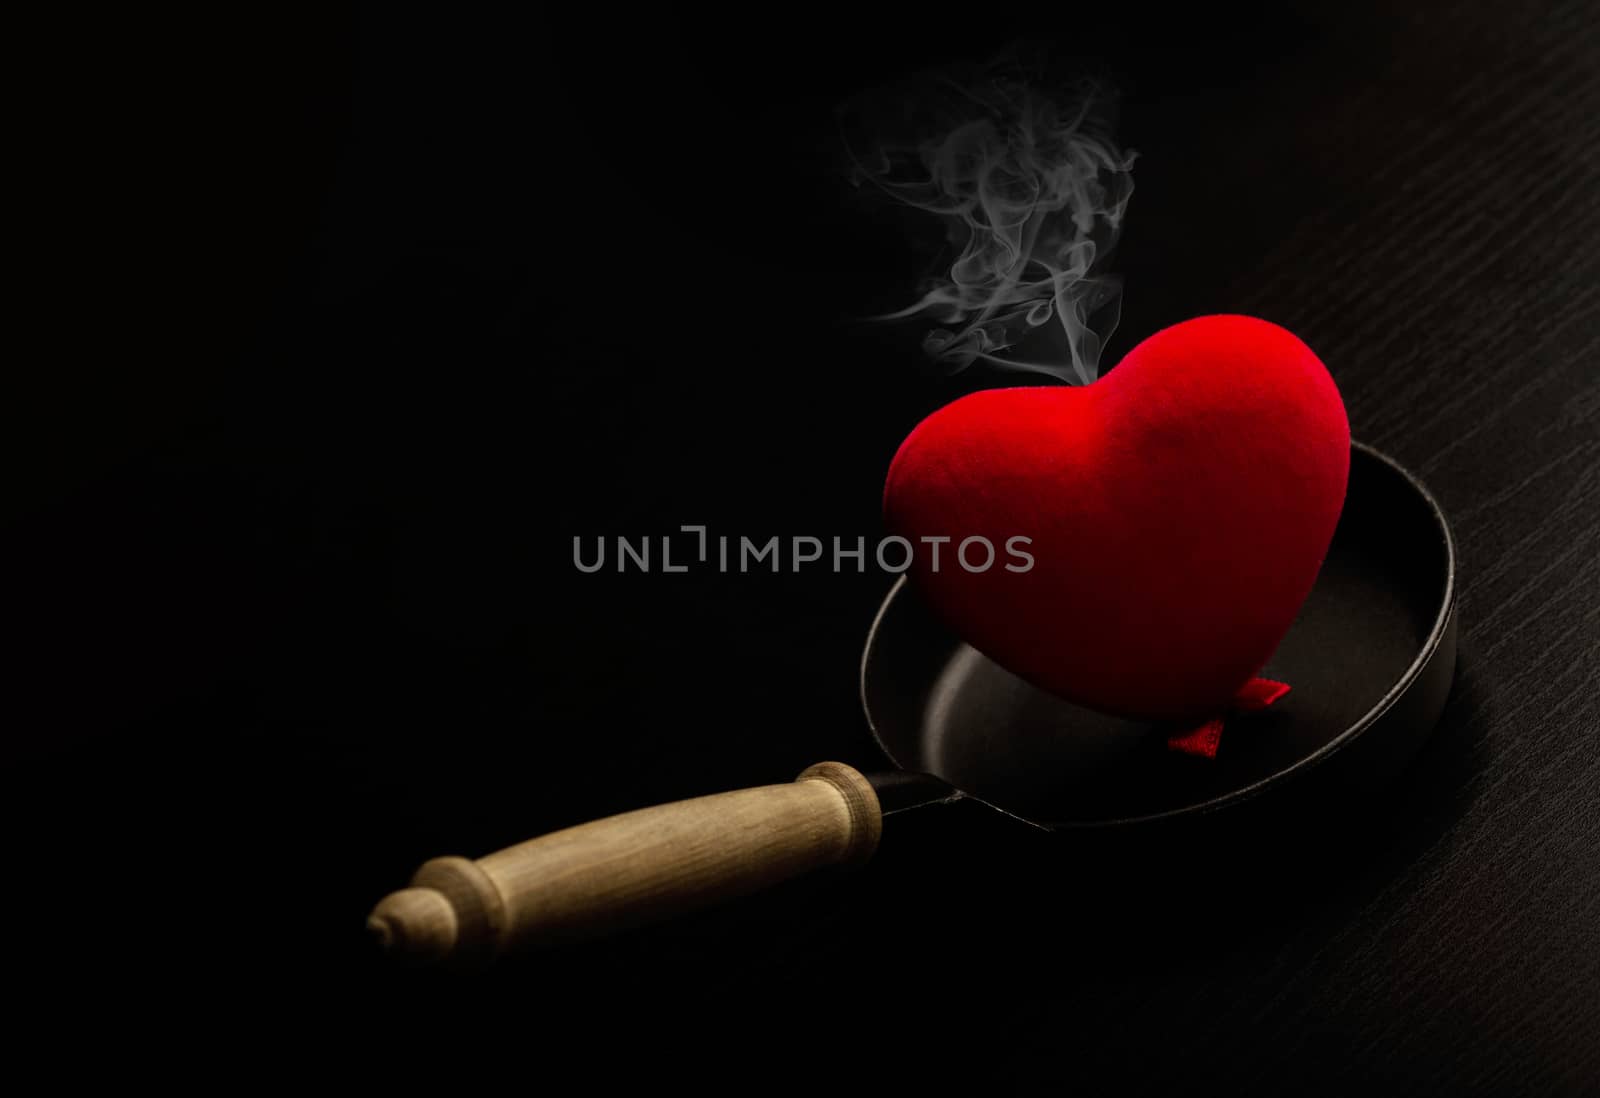 A red heart smoking on a metal frying pan